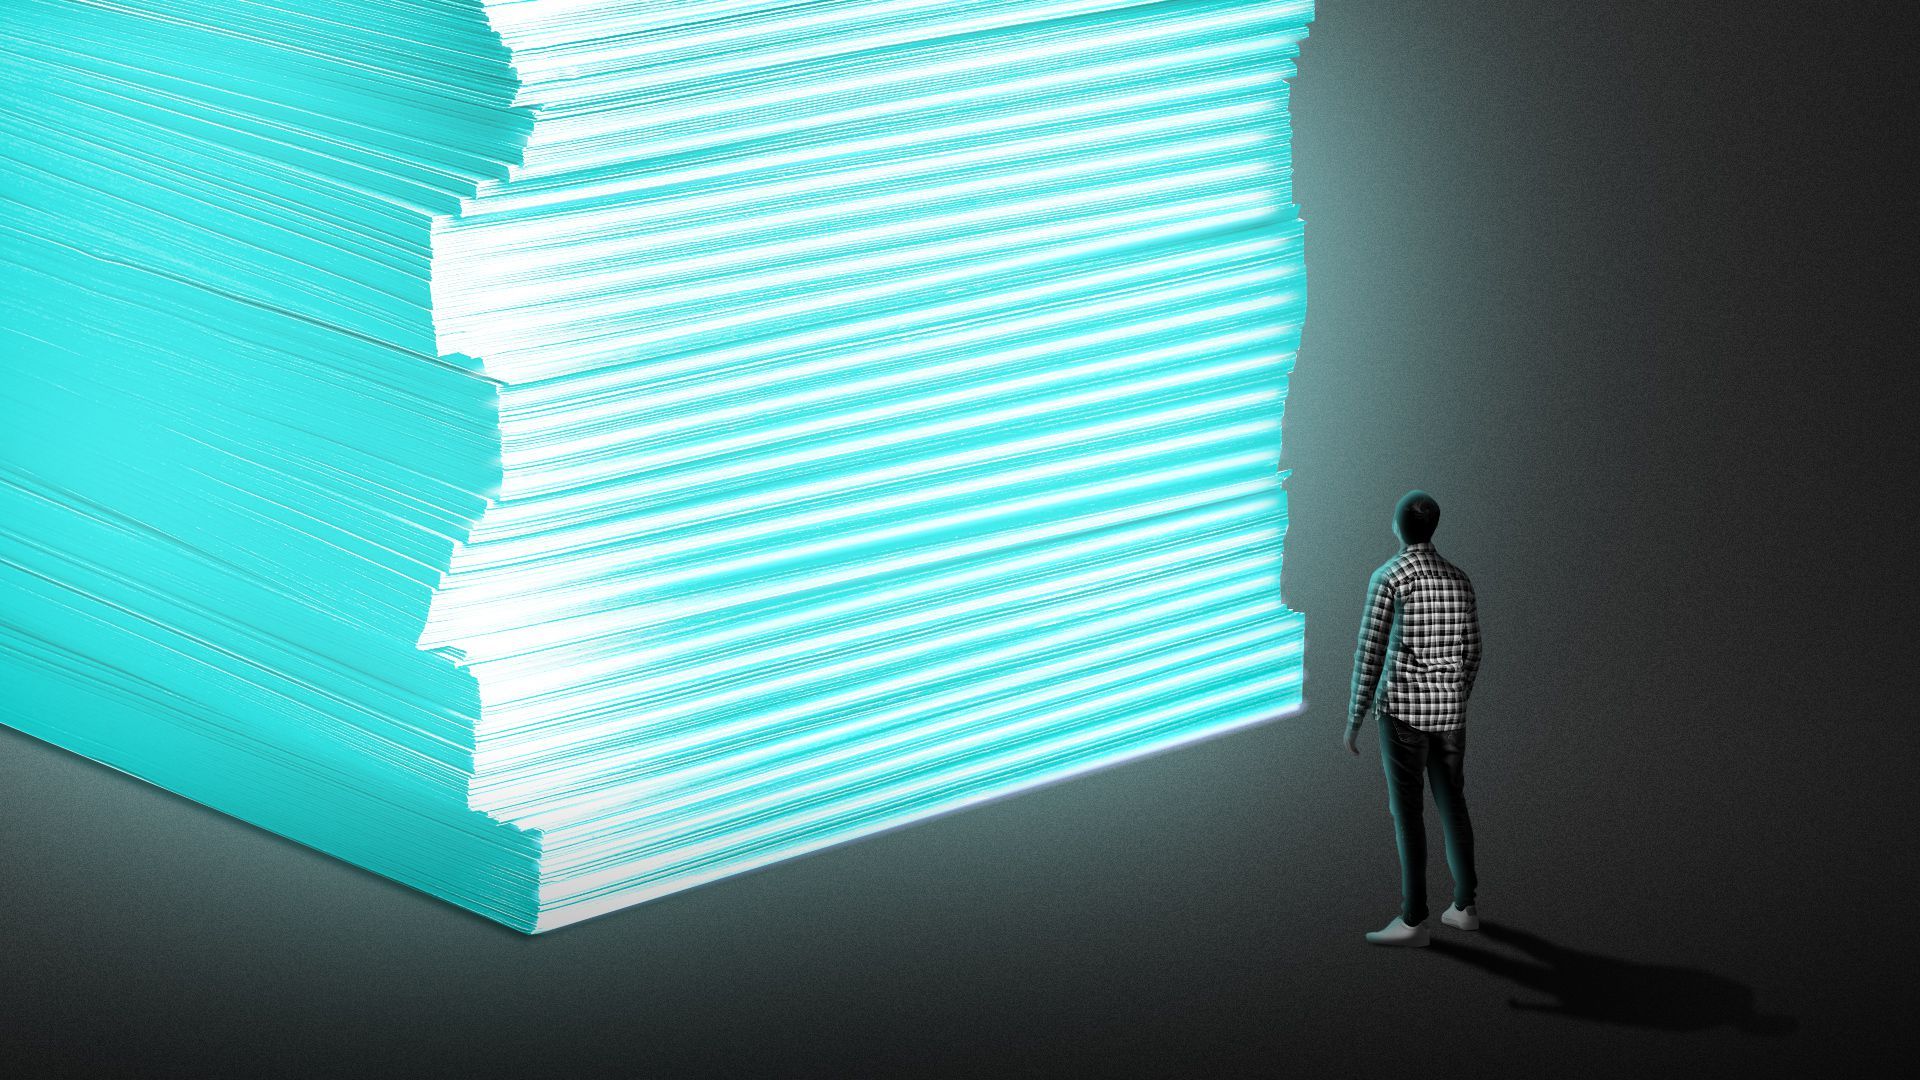 Illustration of a person looking up at a large stack of glowing legislative papers.